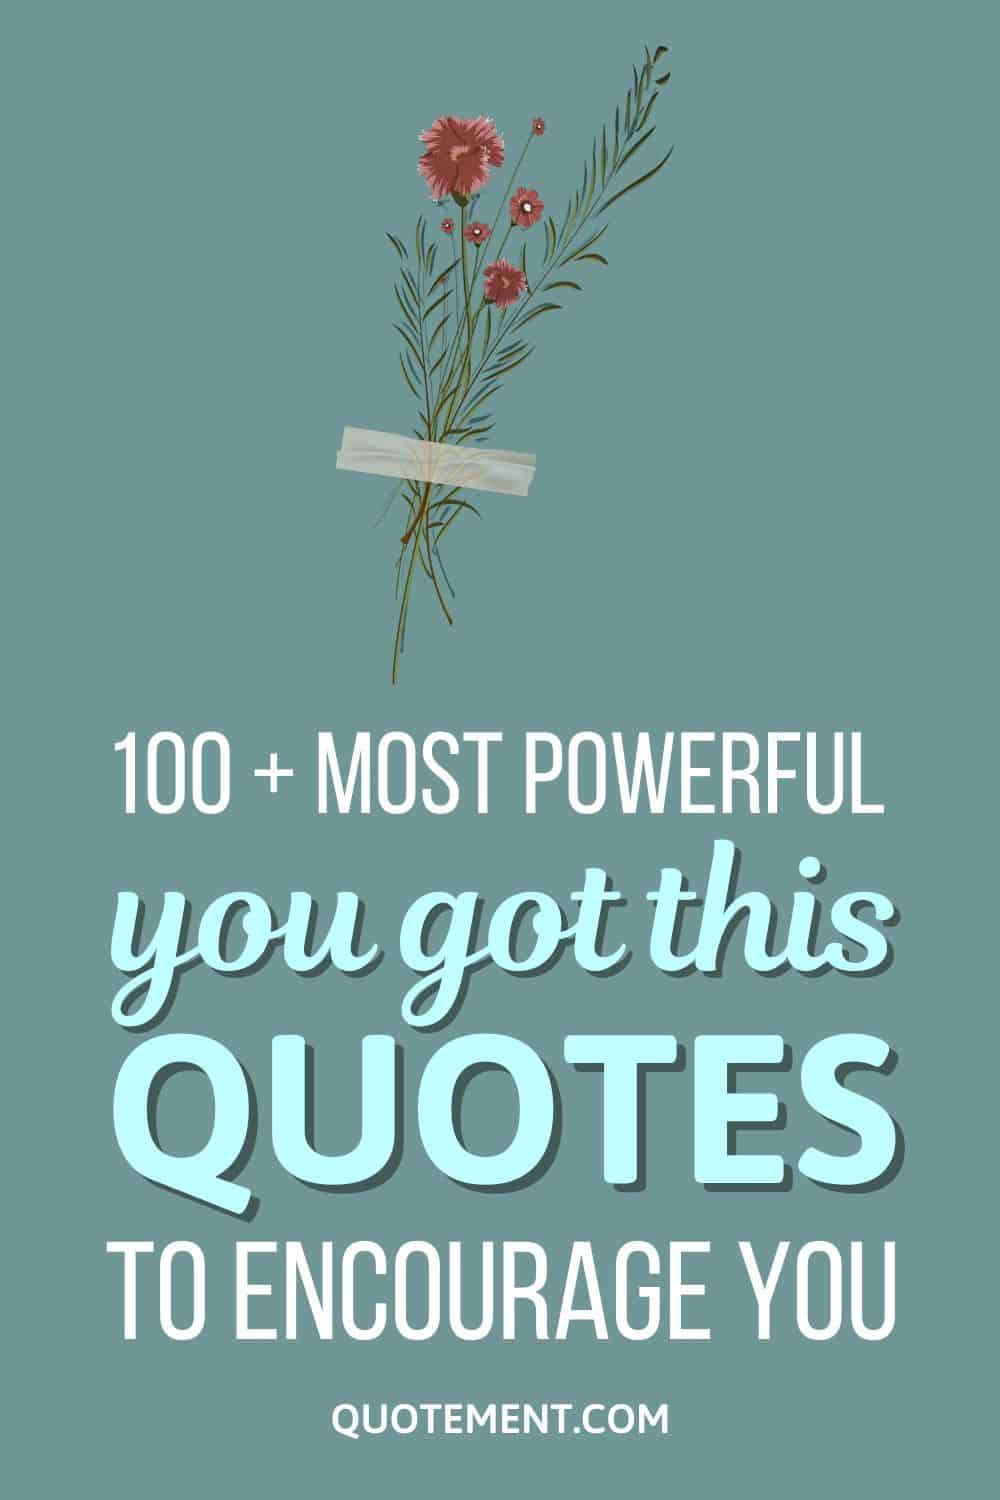 100 + Most Powerful You Got This Quotes To Encourage You